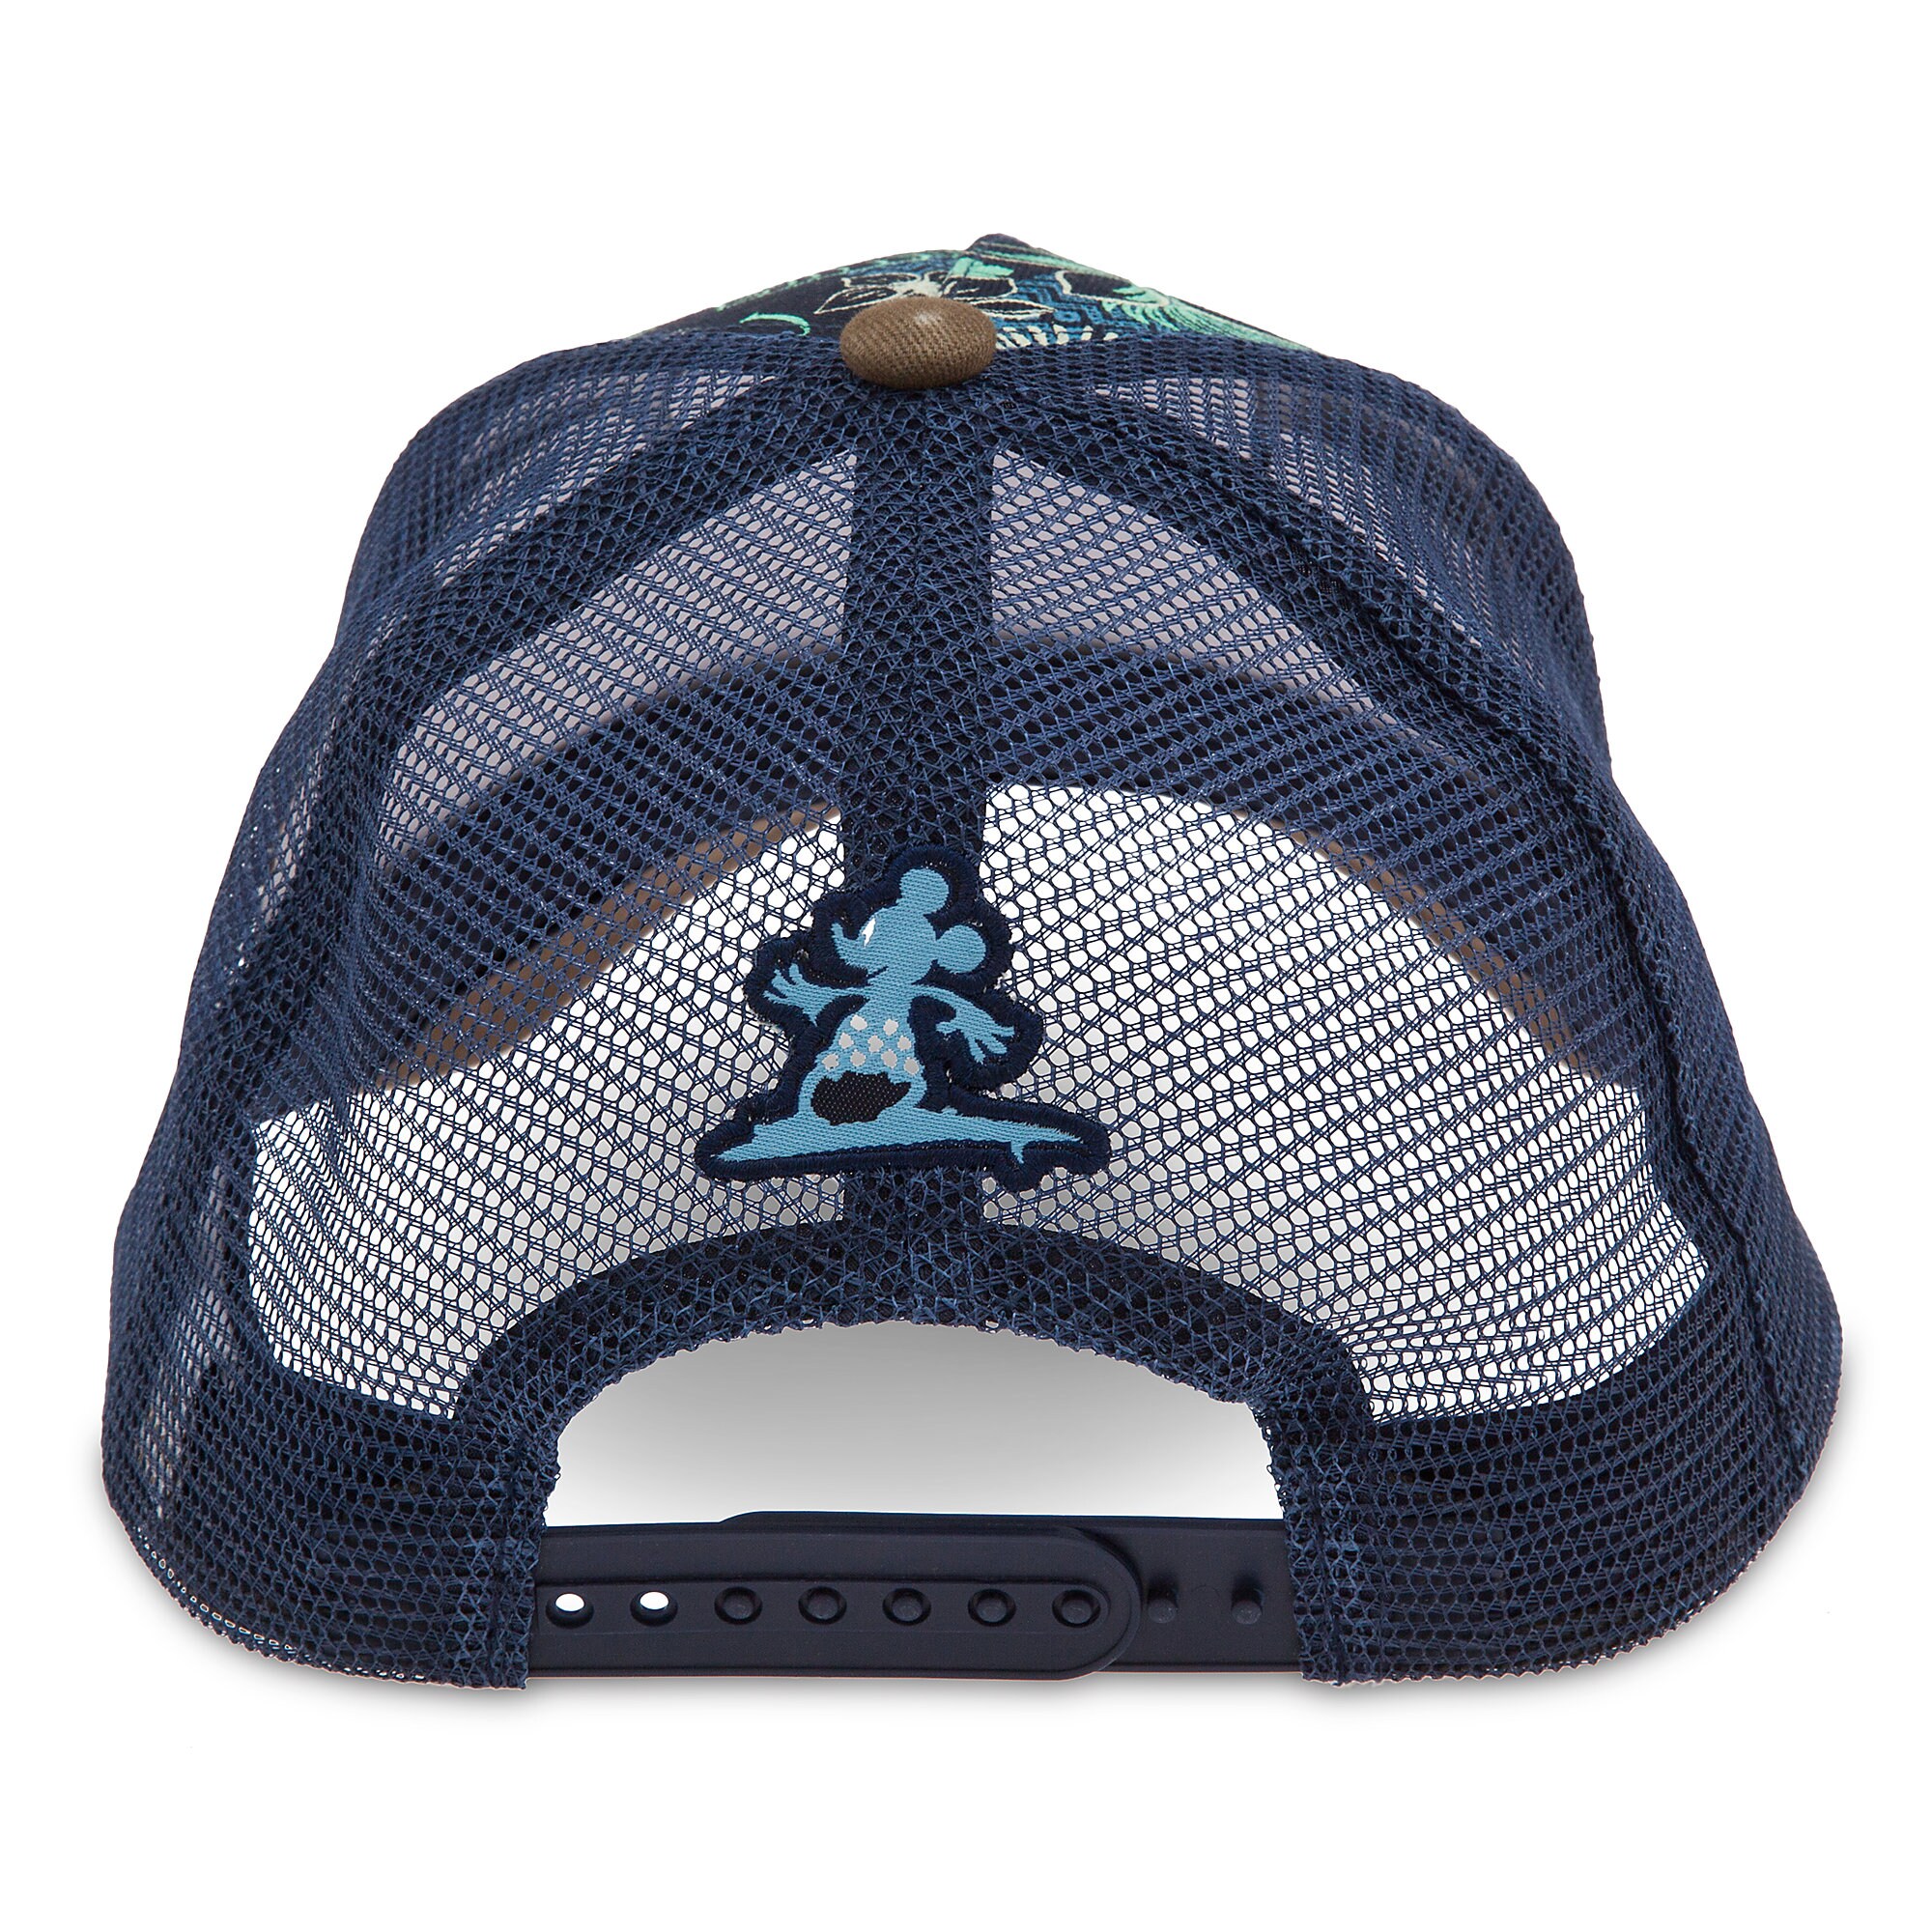 Aulani, A Disney Resort & Spa Trucker Hat for Adults